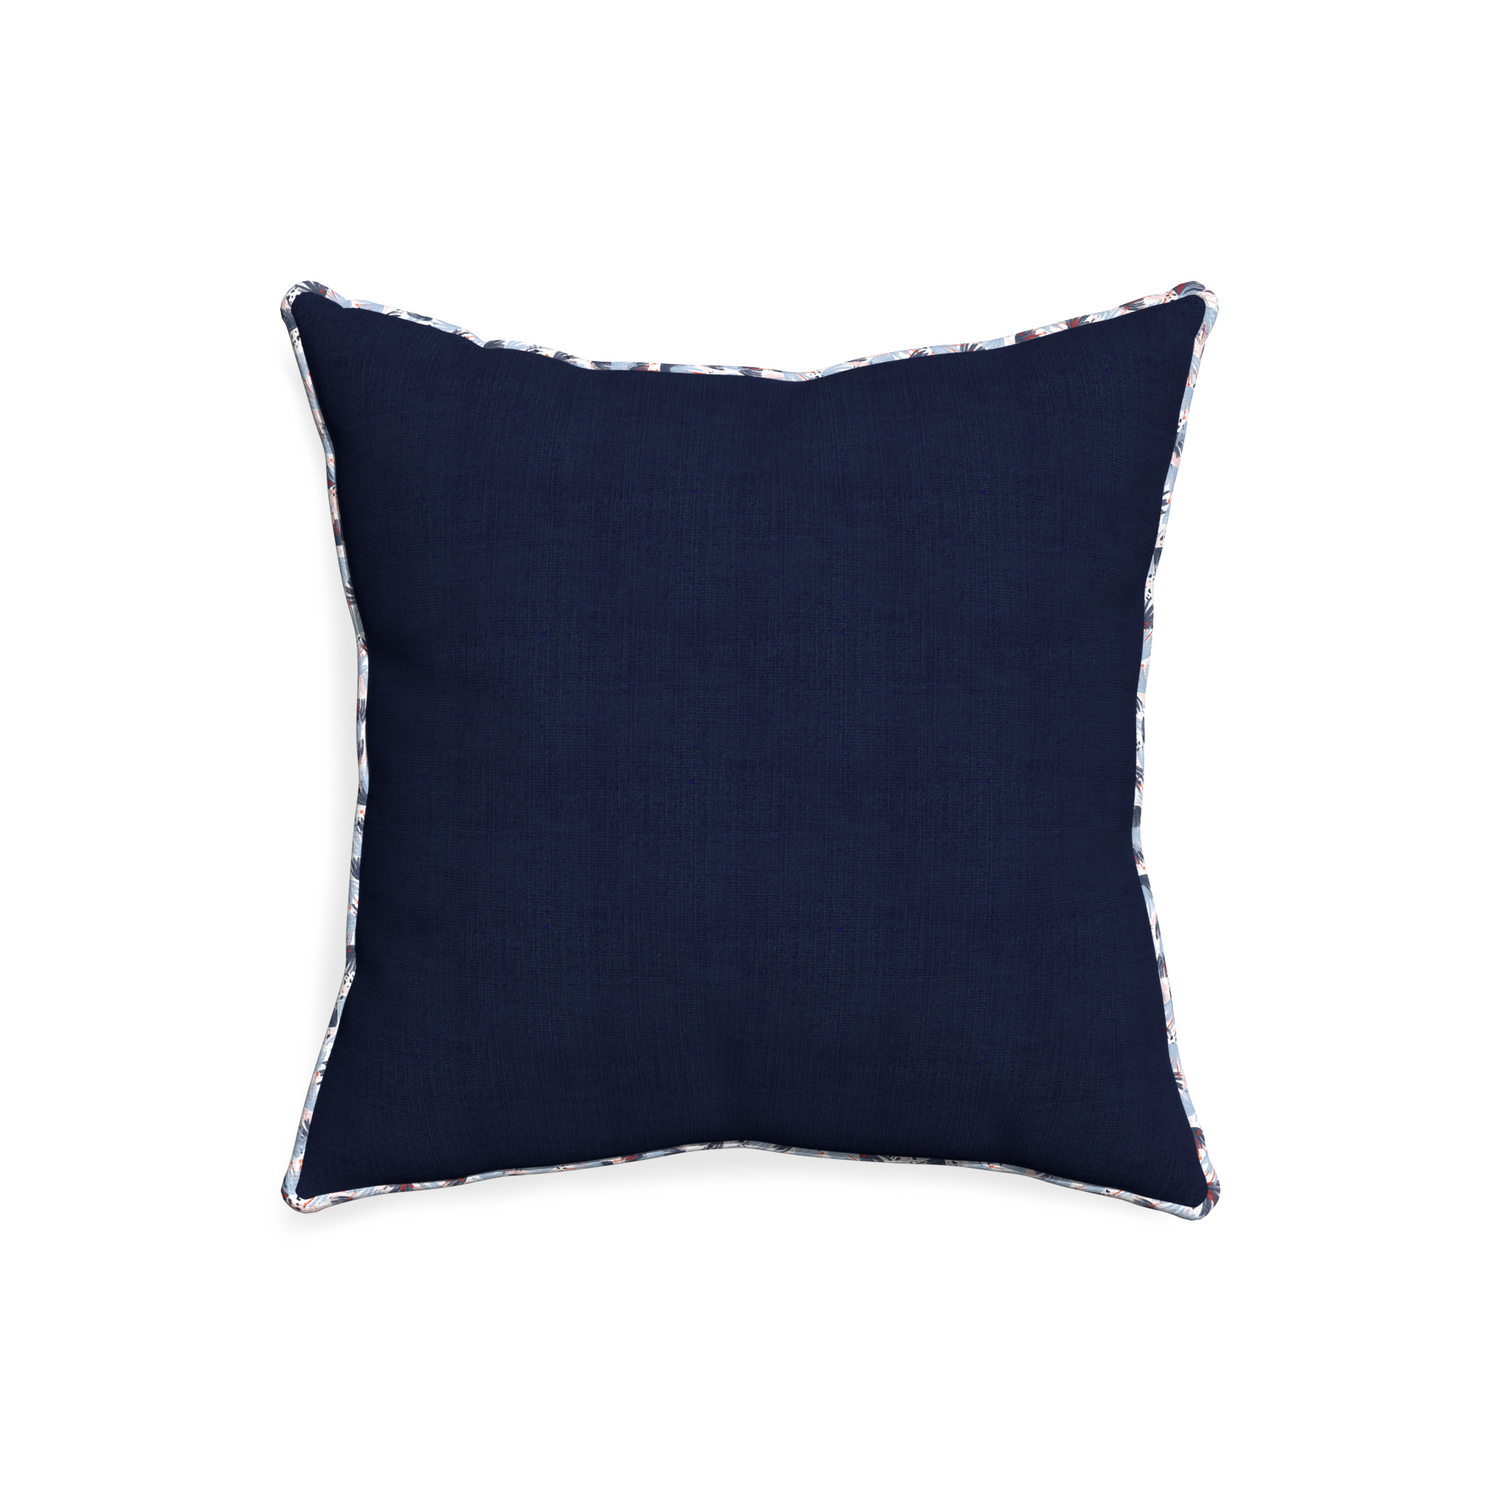 20-square midnight custom navy bluepillow with e piping on white background